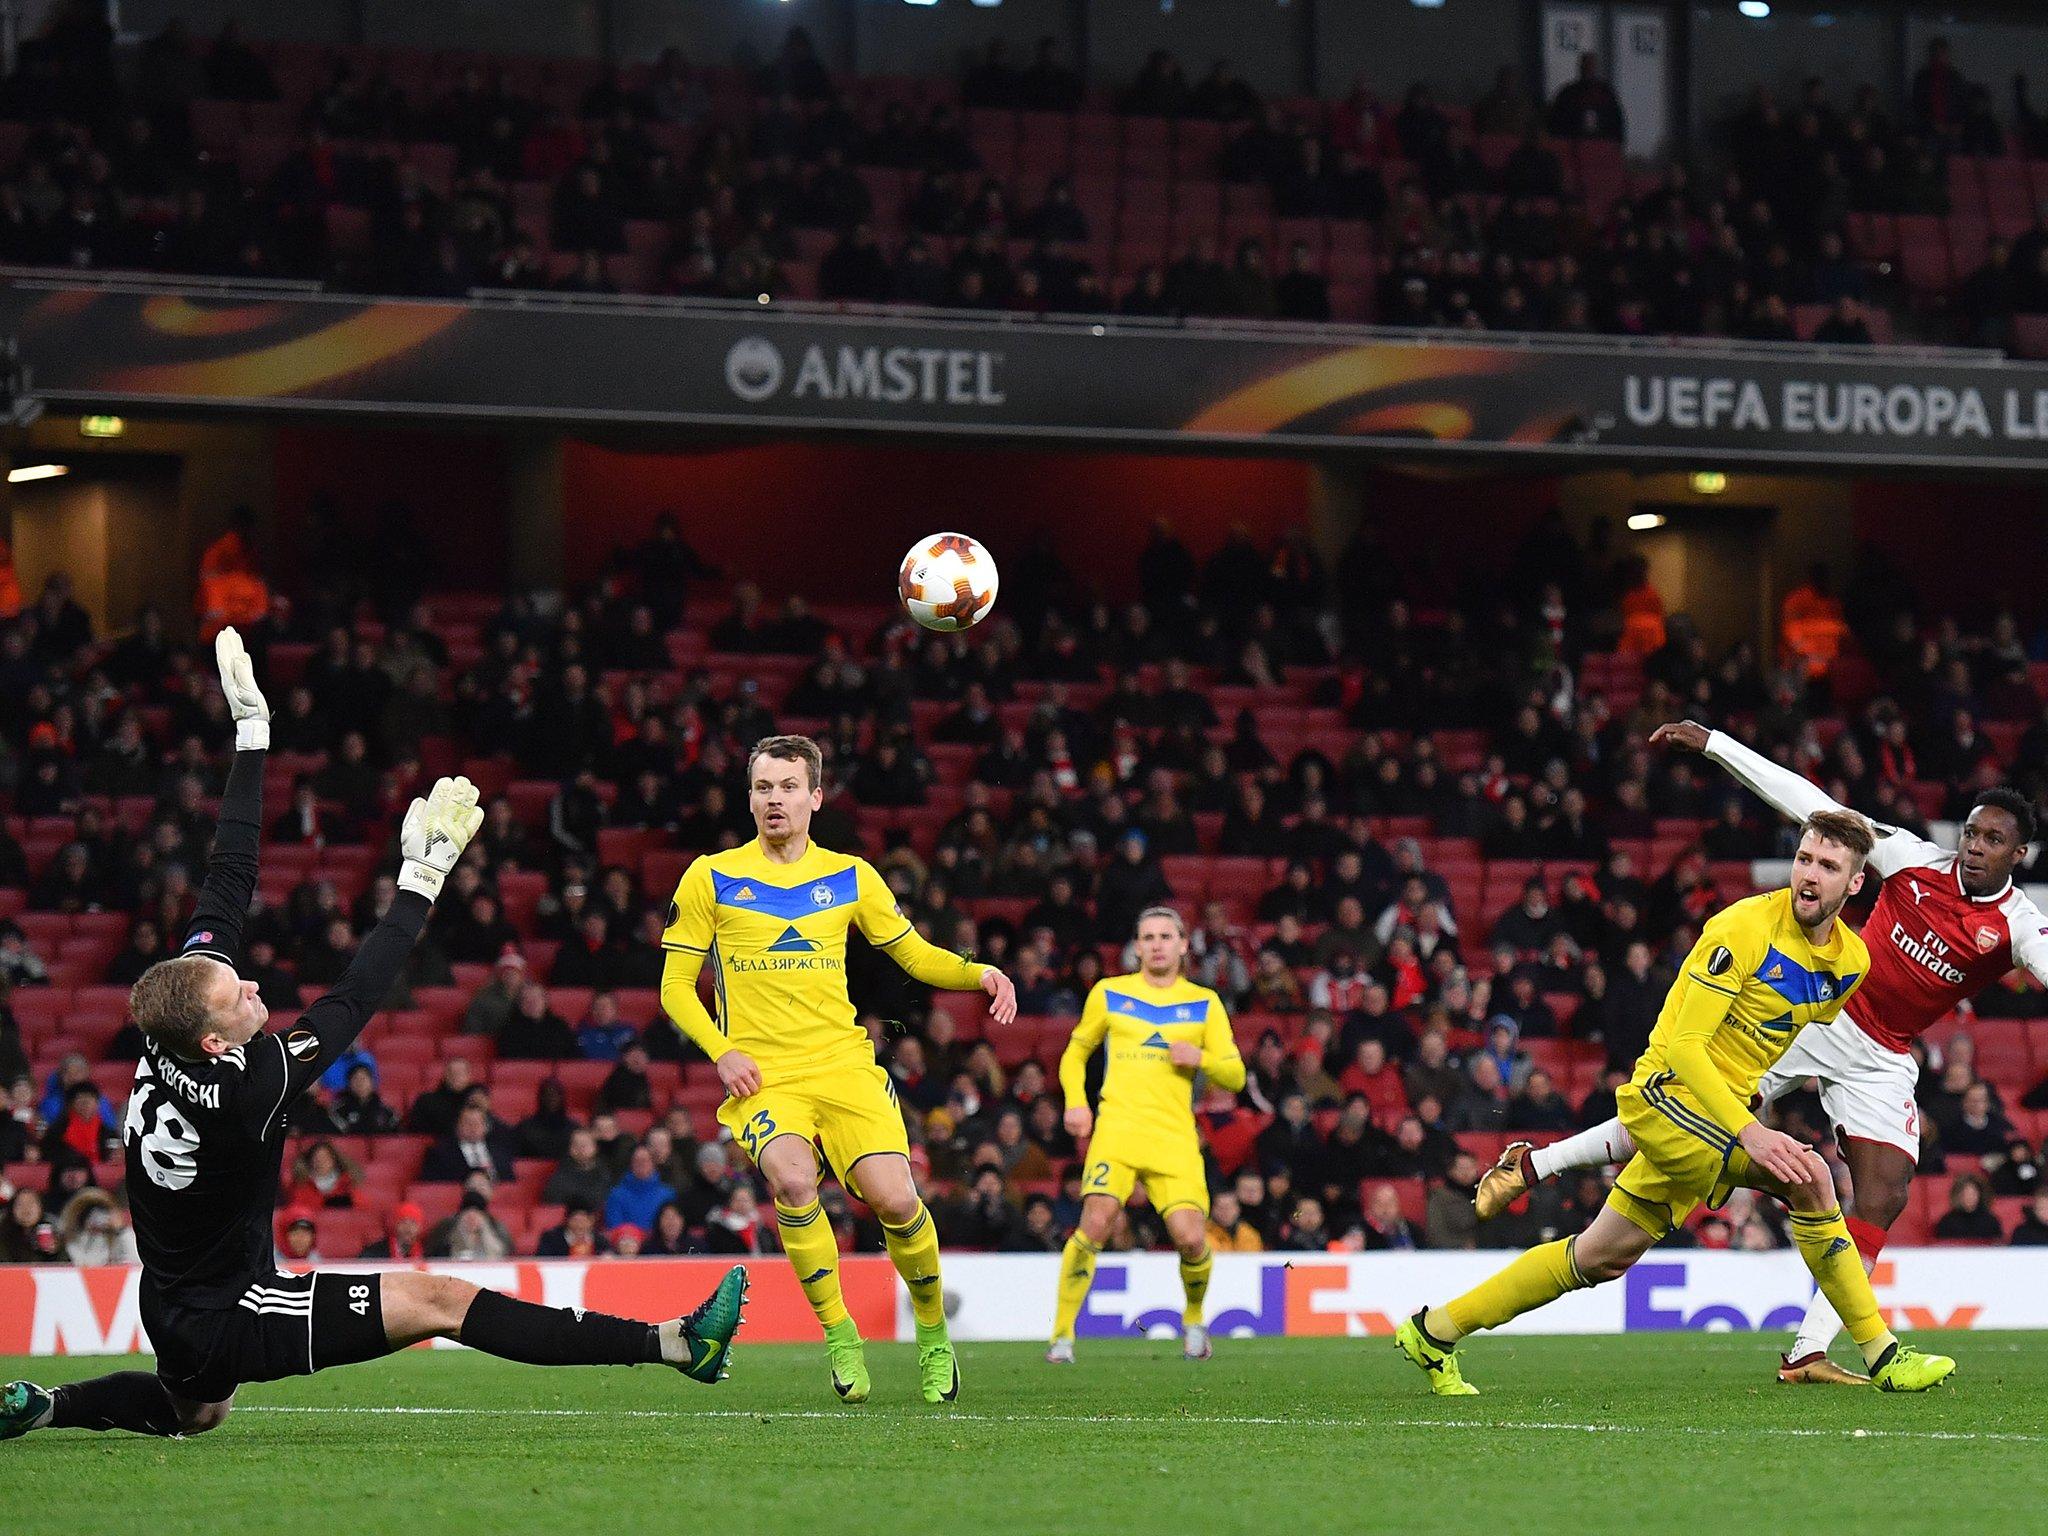 Arsenal claim attendance for BATE Borisov game was 648 but